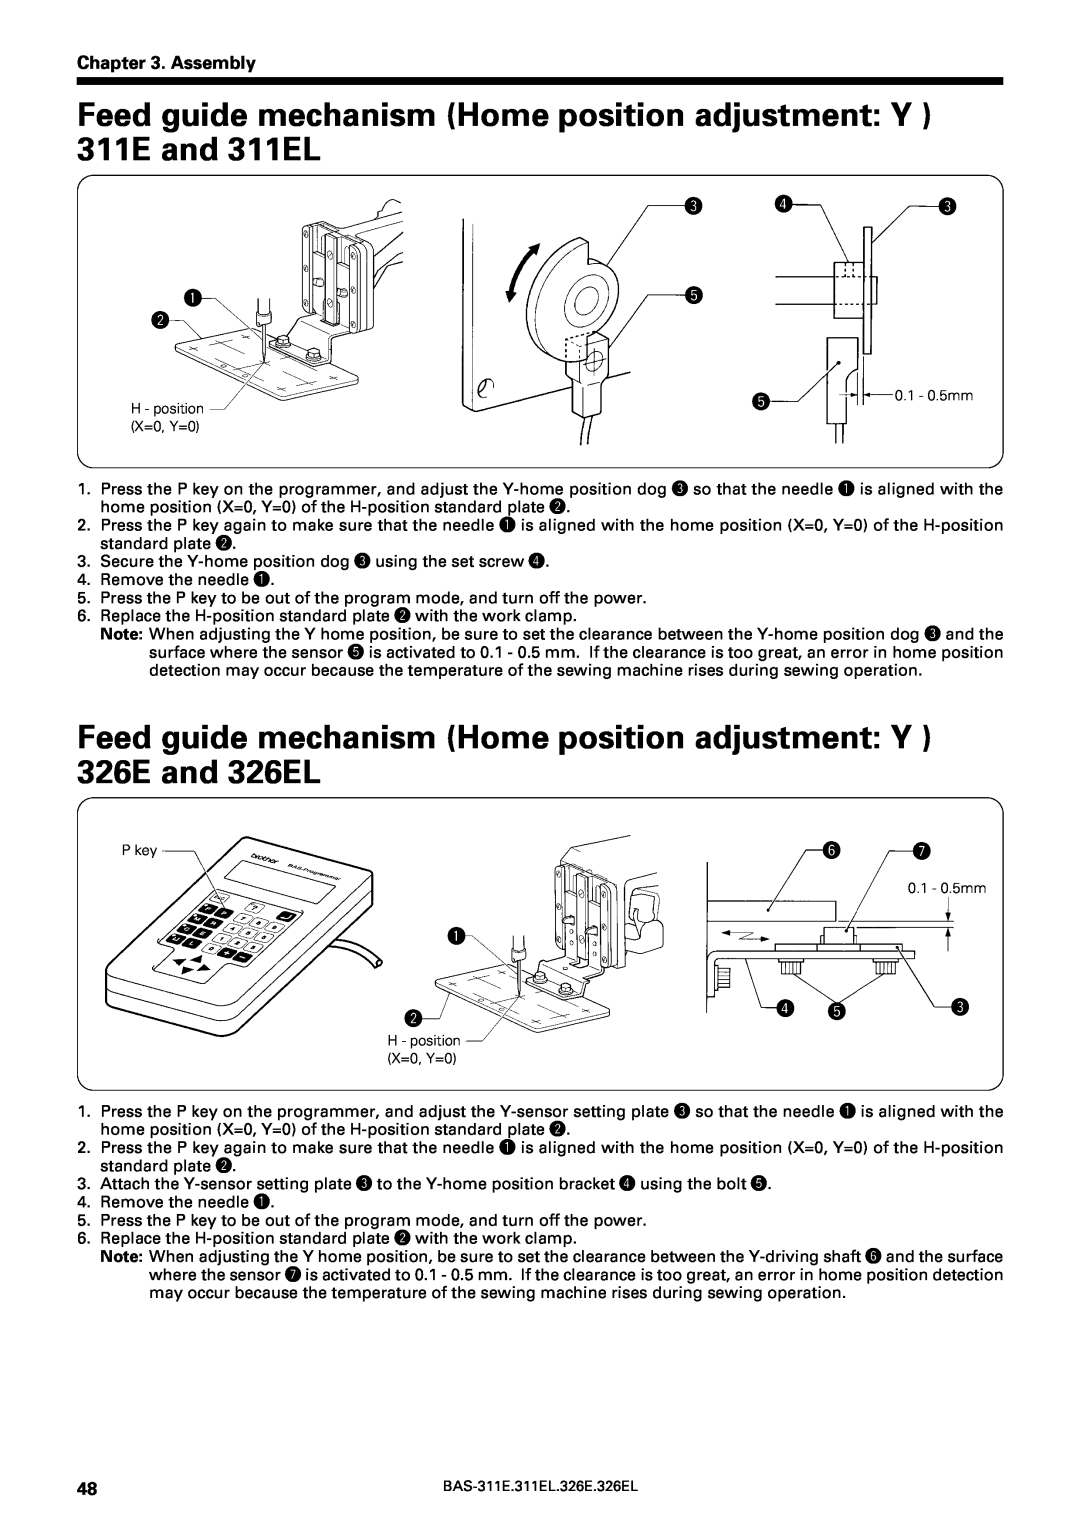 Brother BAS-311E Feed guide mechanism Home position adjustment Y 311E and 311EL, Assembly, qt w, P key, H - position 